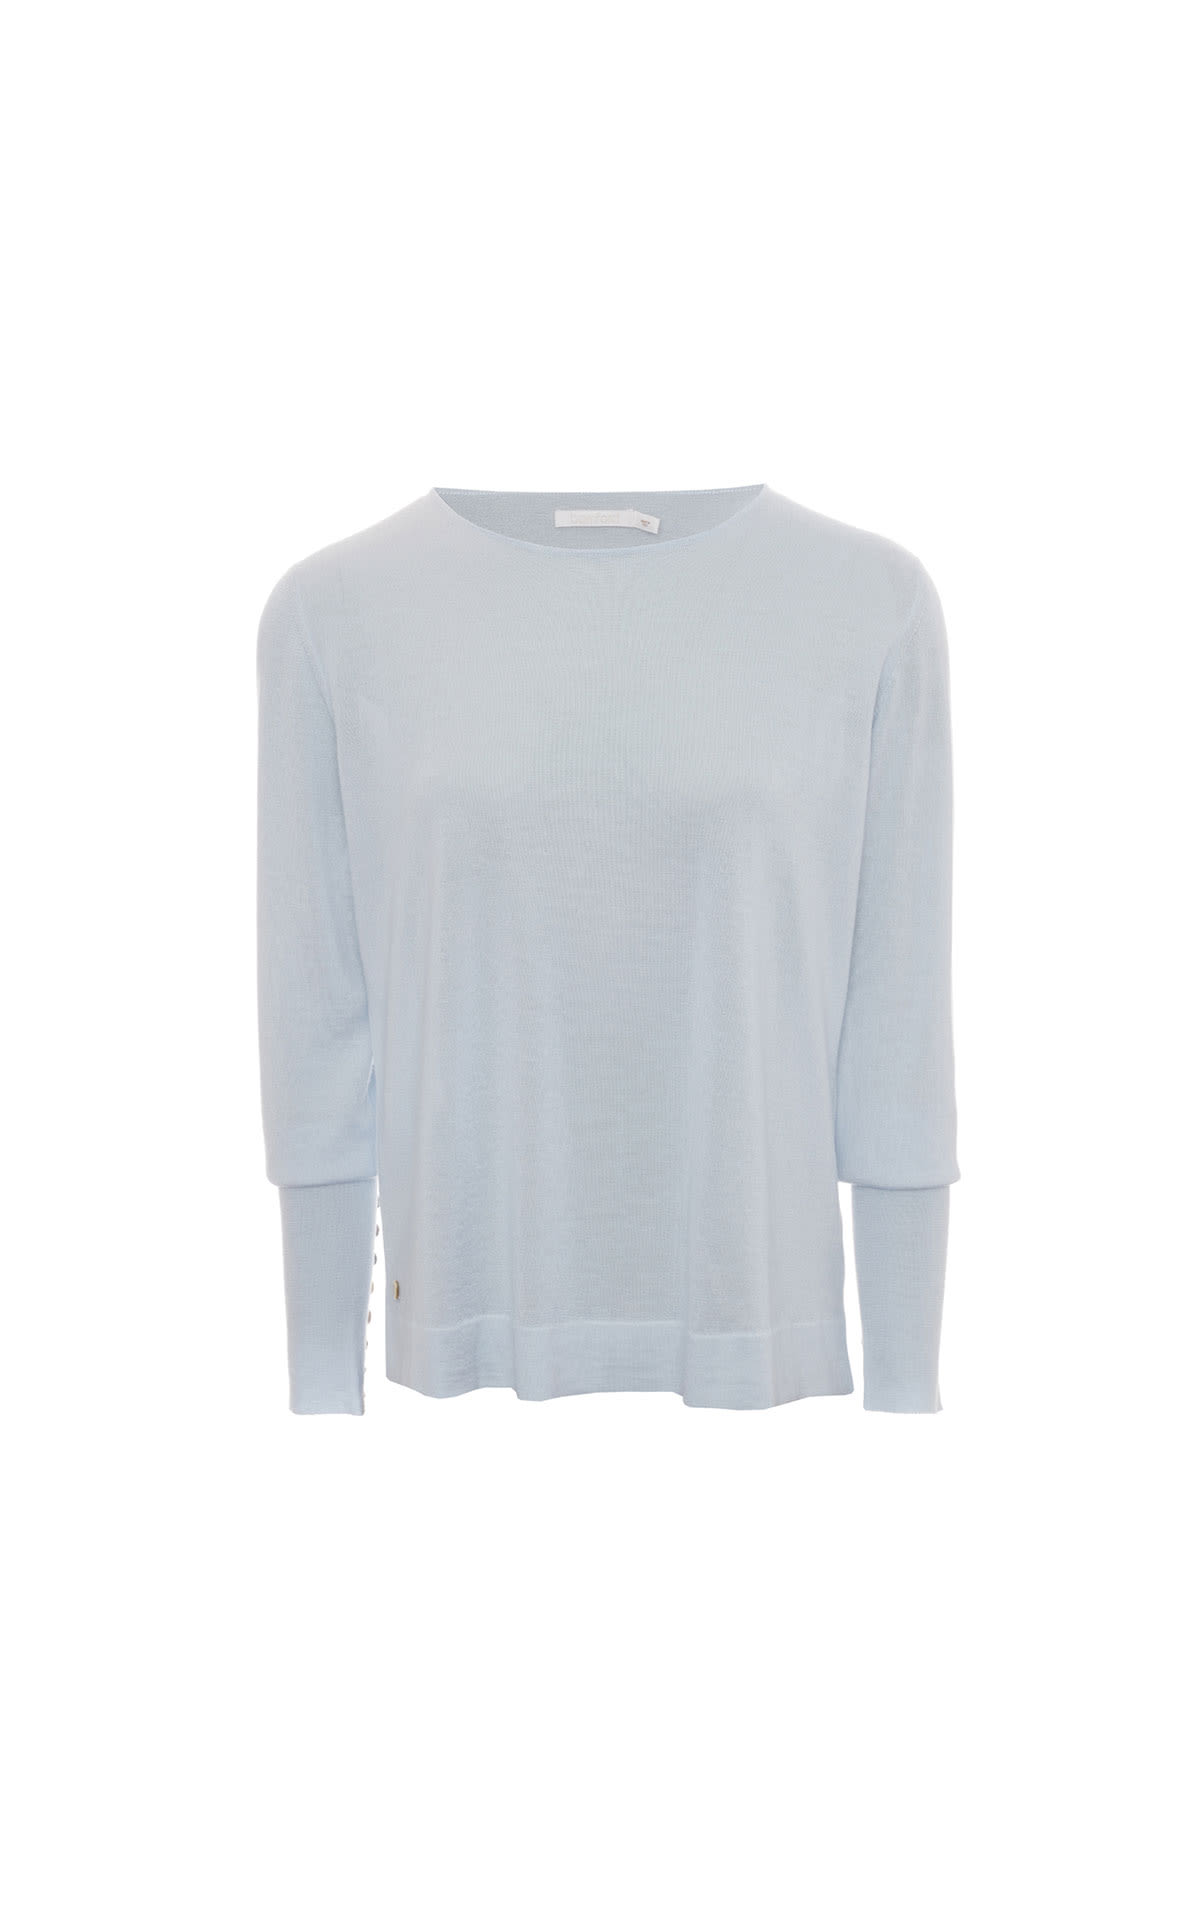 Bamford Button cuff knit from Bicester Village